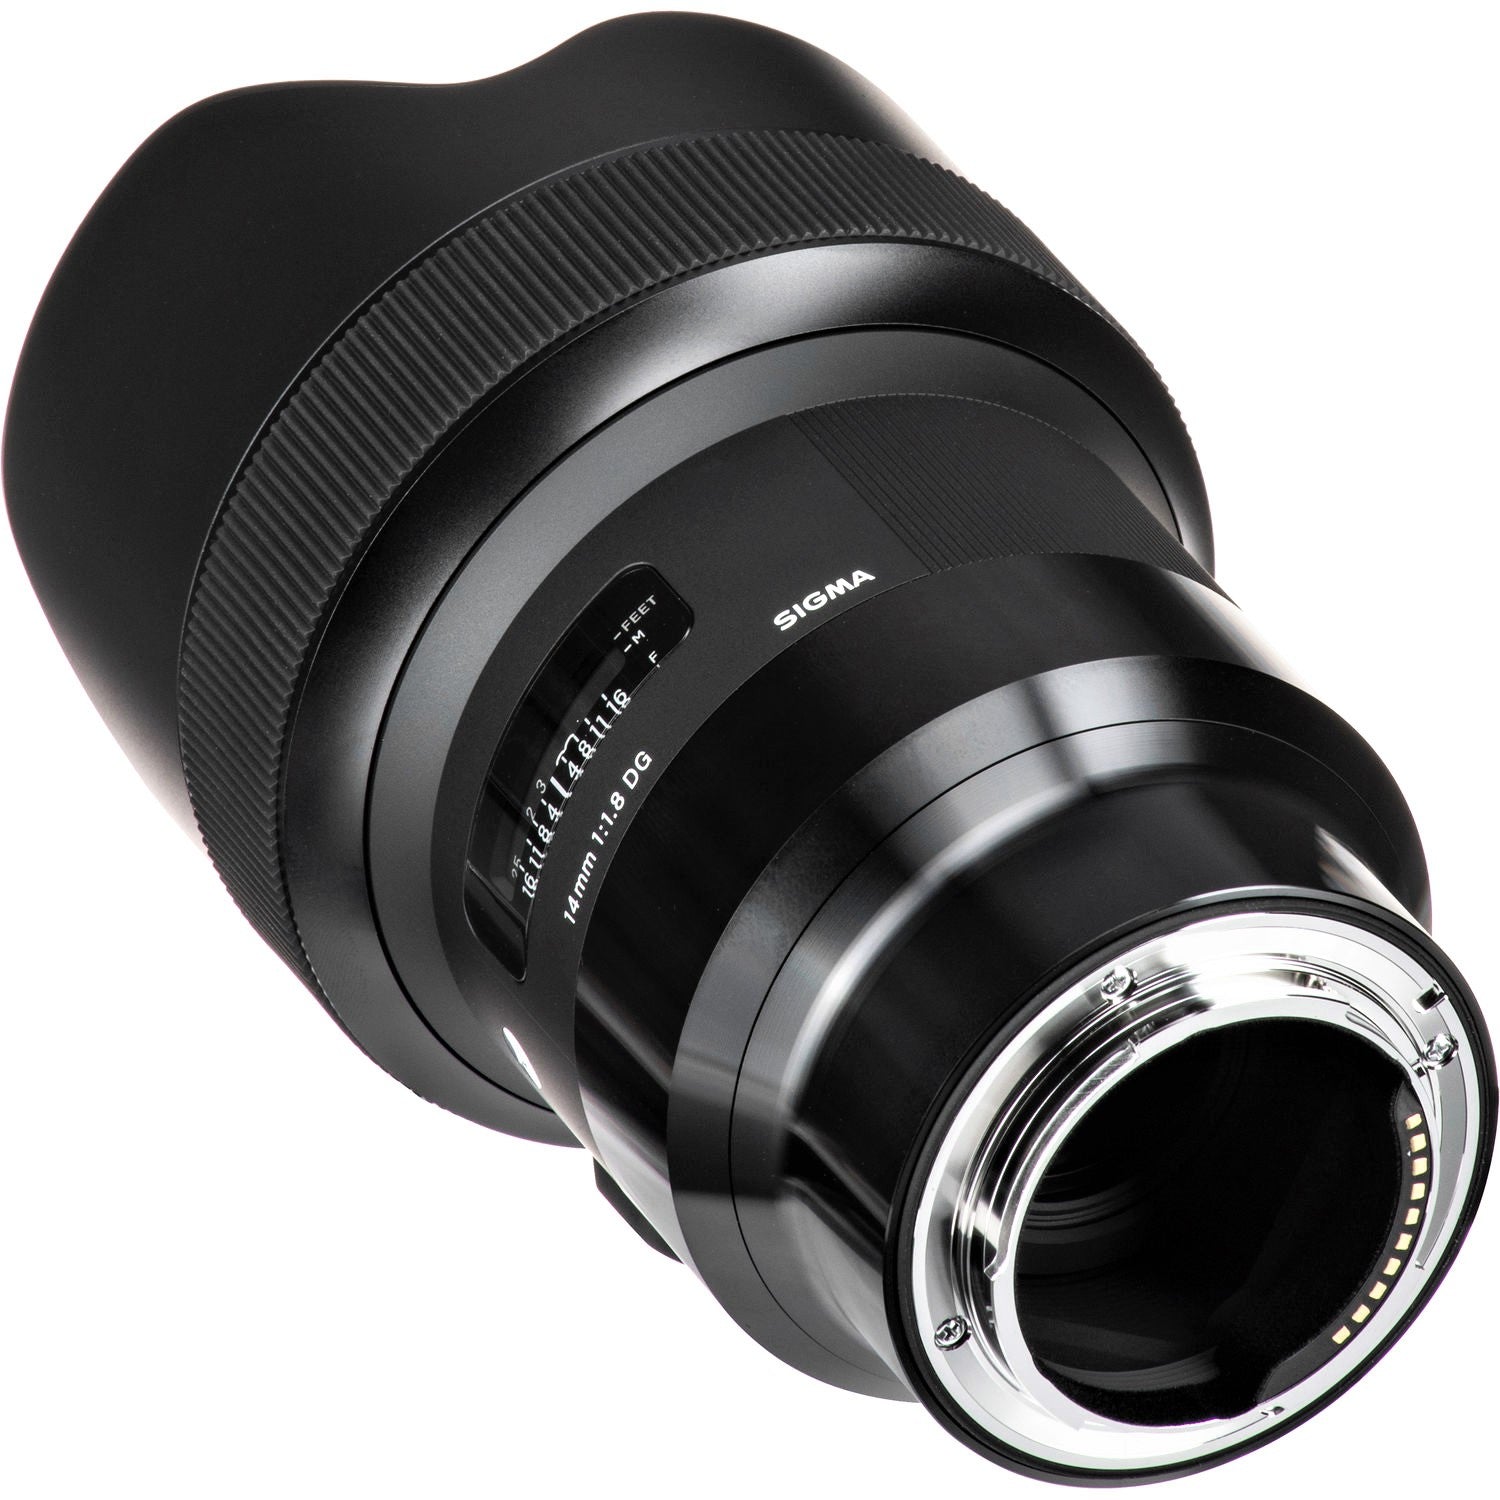 Sigma 14mm F1.8 DG HSM Art Lens for Sony E in a Back-Side View